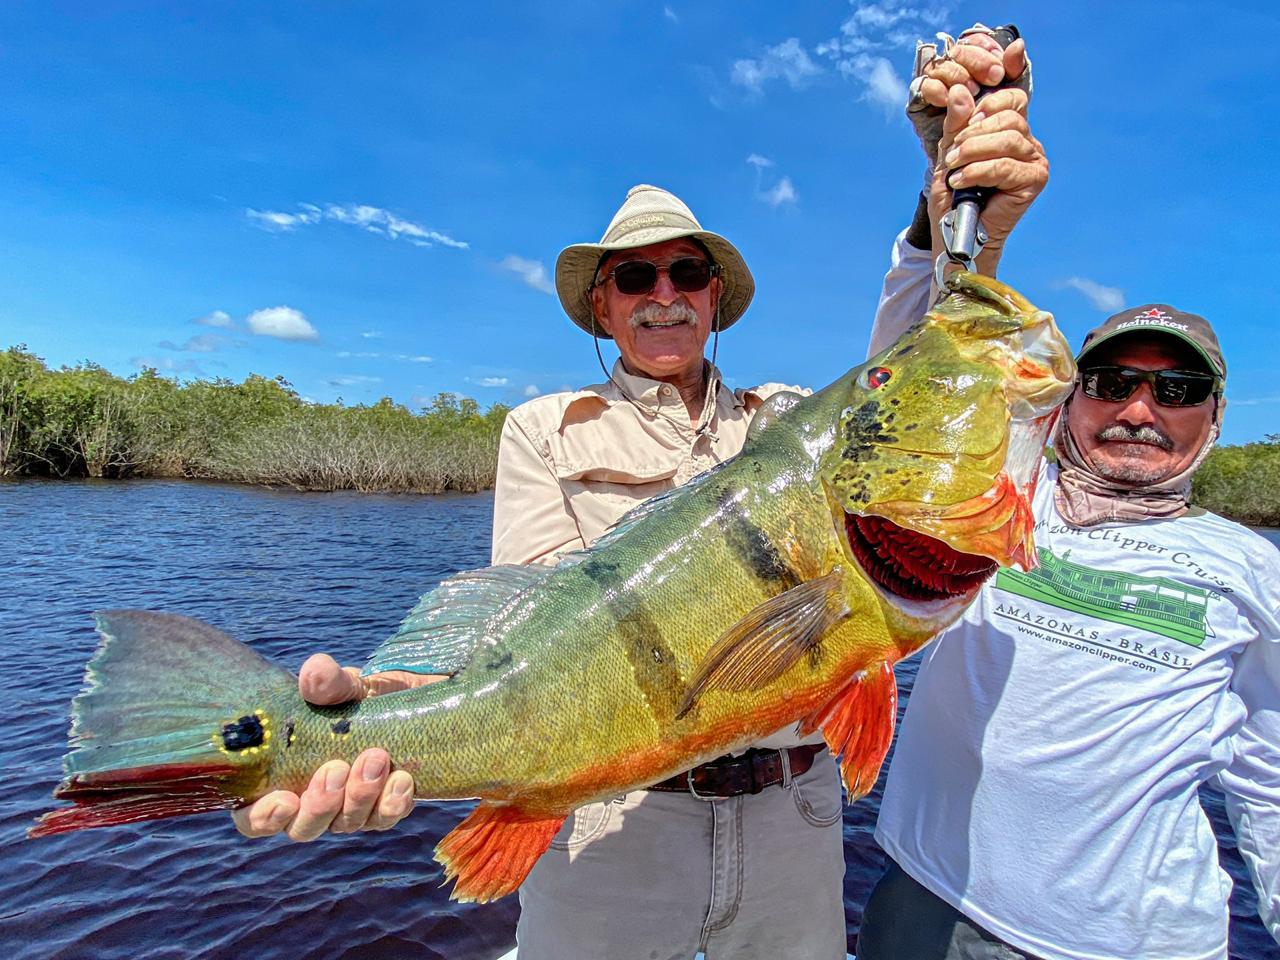 https://www.ronsfishingblog.com/wp-content/uploads/2023/03/Brazil-Guide-and-client.jpg